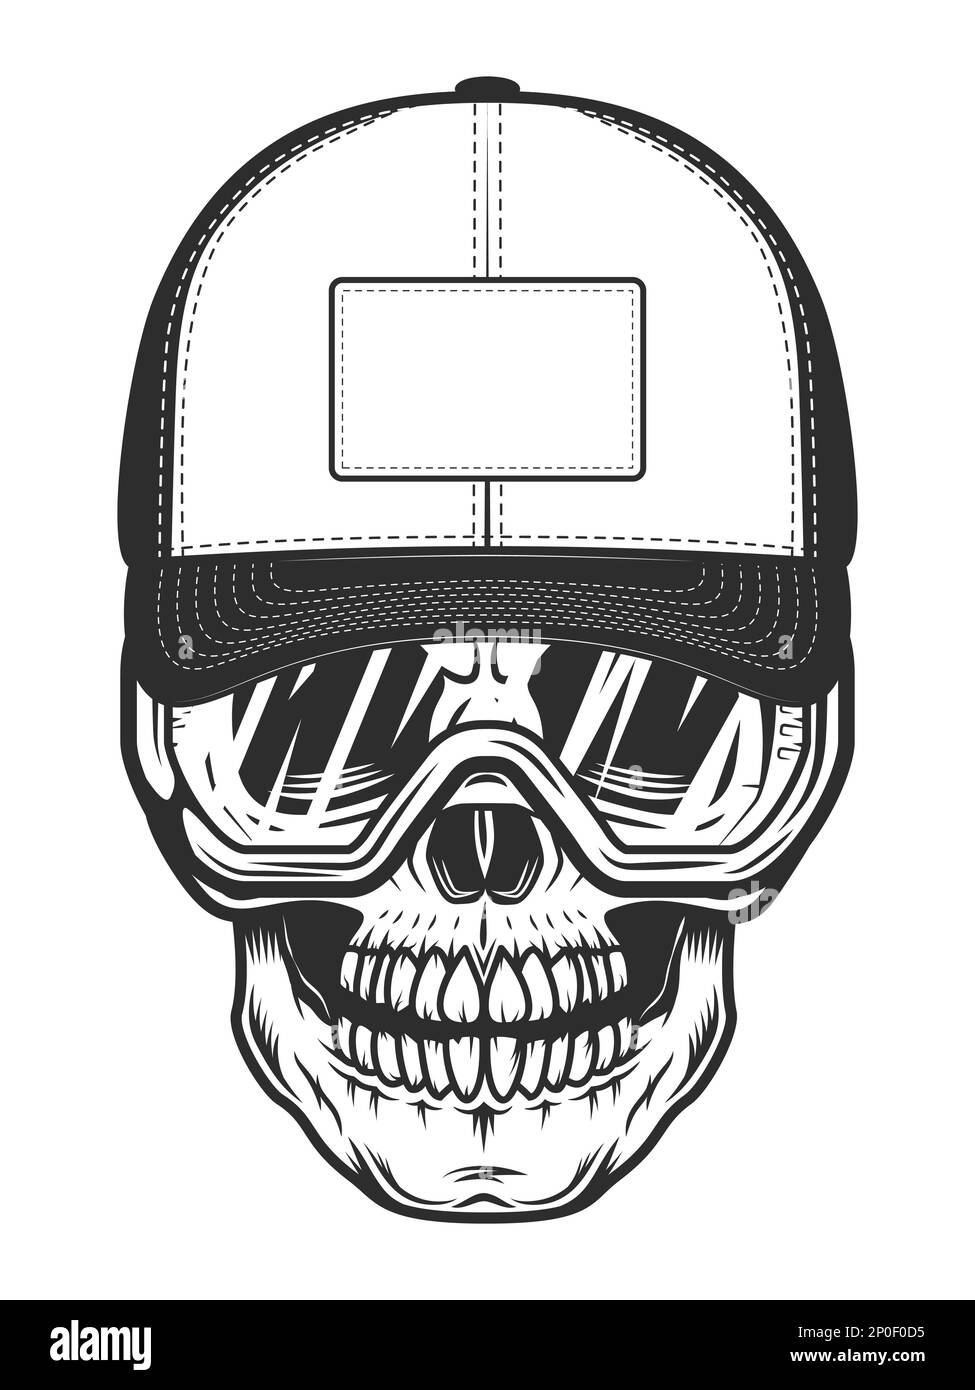 Skull in baseball cap with construction safety glasses in vintage monochrome style isolated illustration Stock Photo